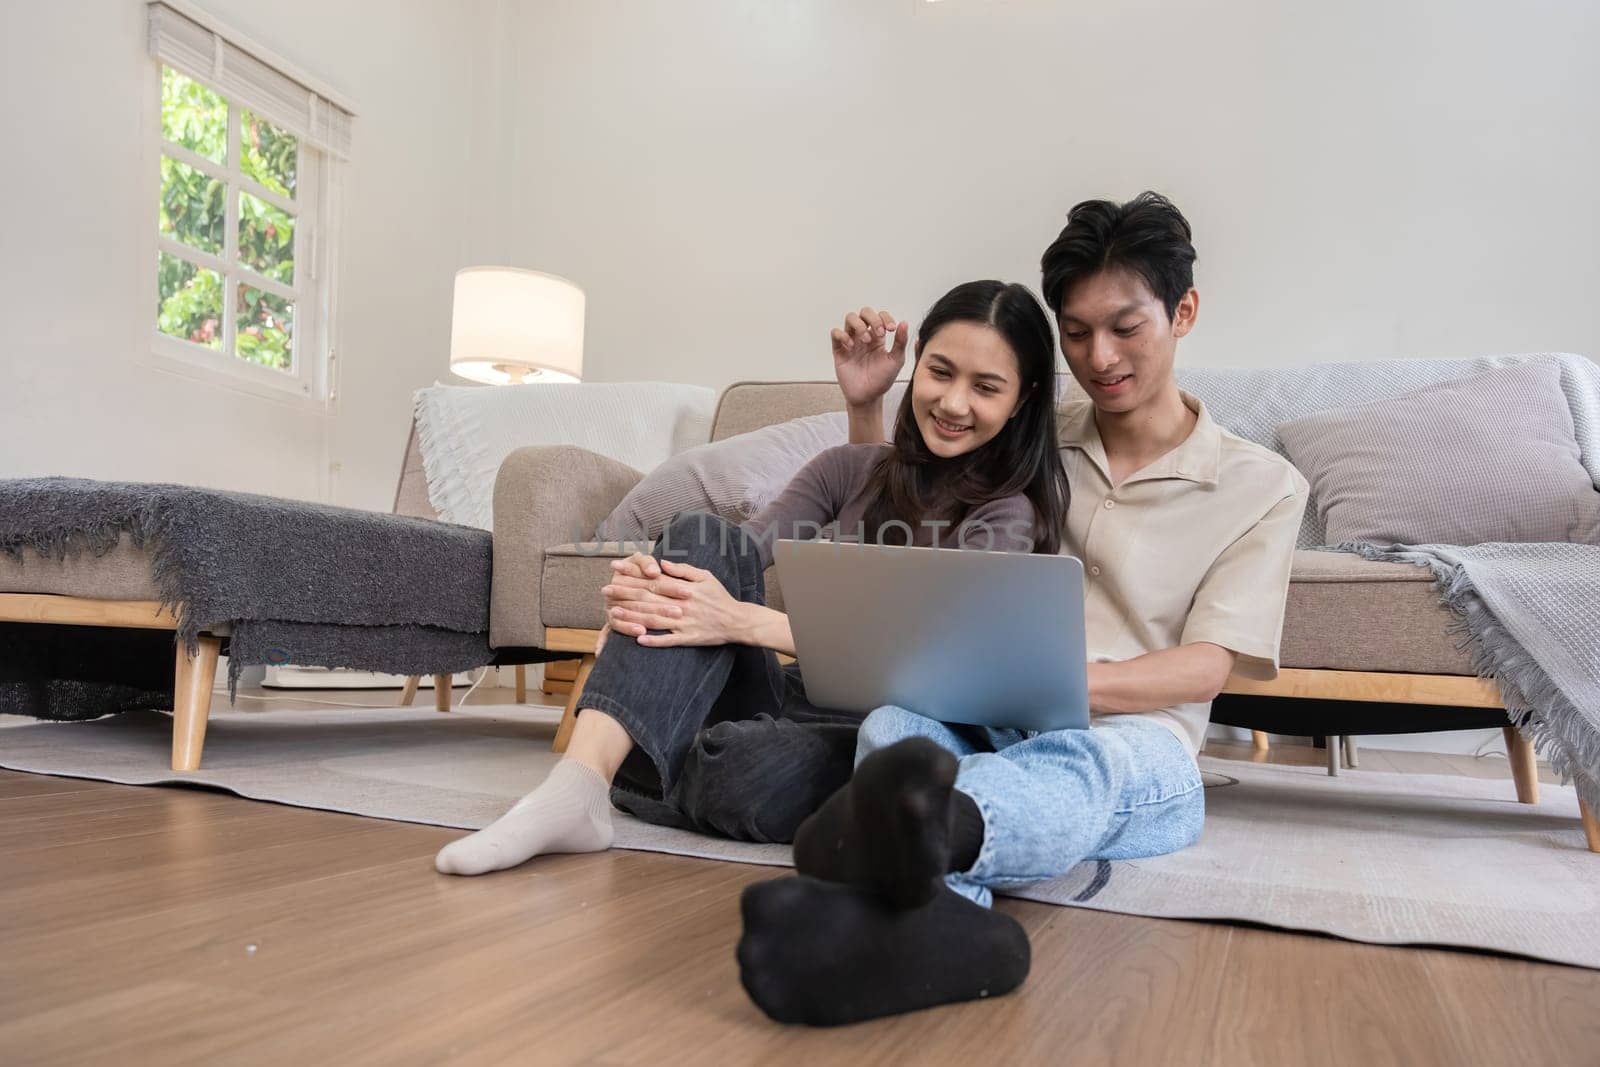 Young Asian couple in love Sitting happily together looking at laptop and relaxing in the living room. Couple making romantic love in the living room.